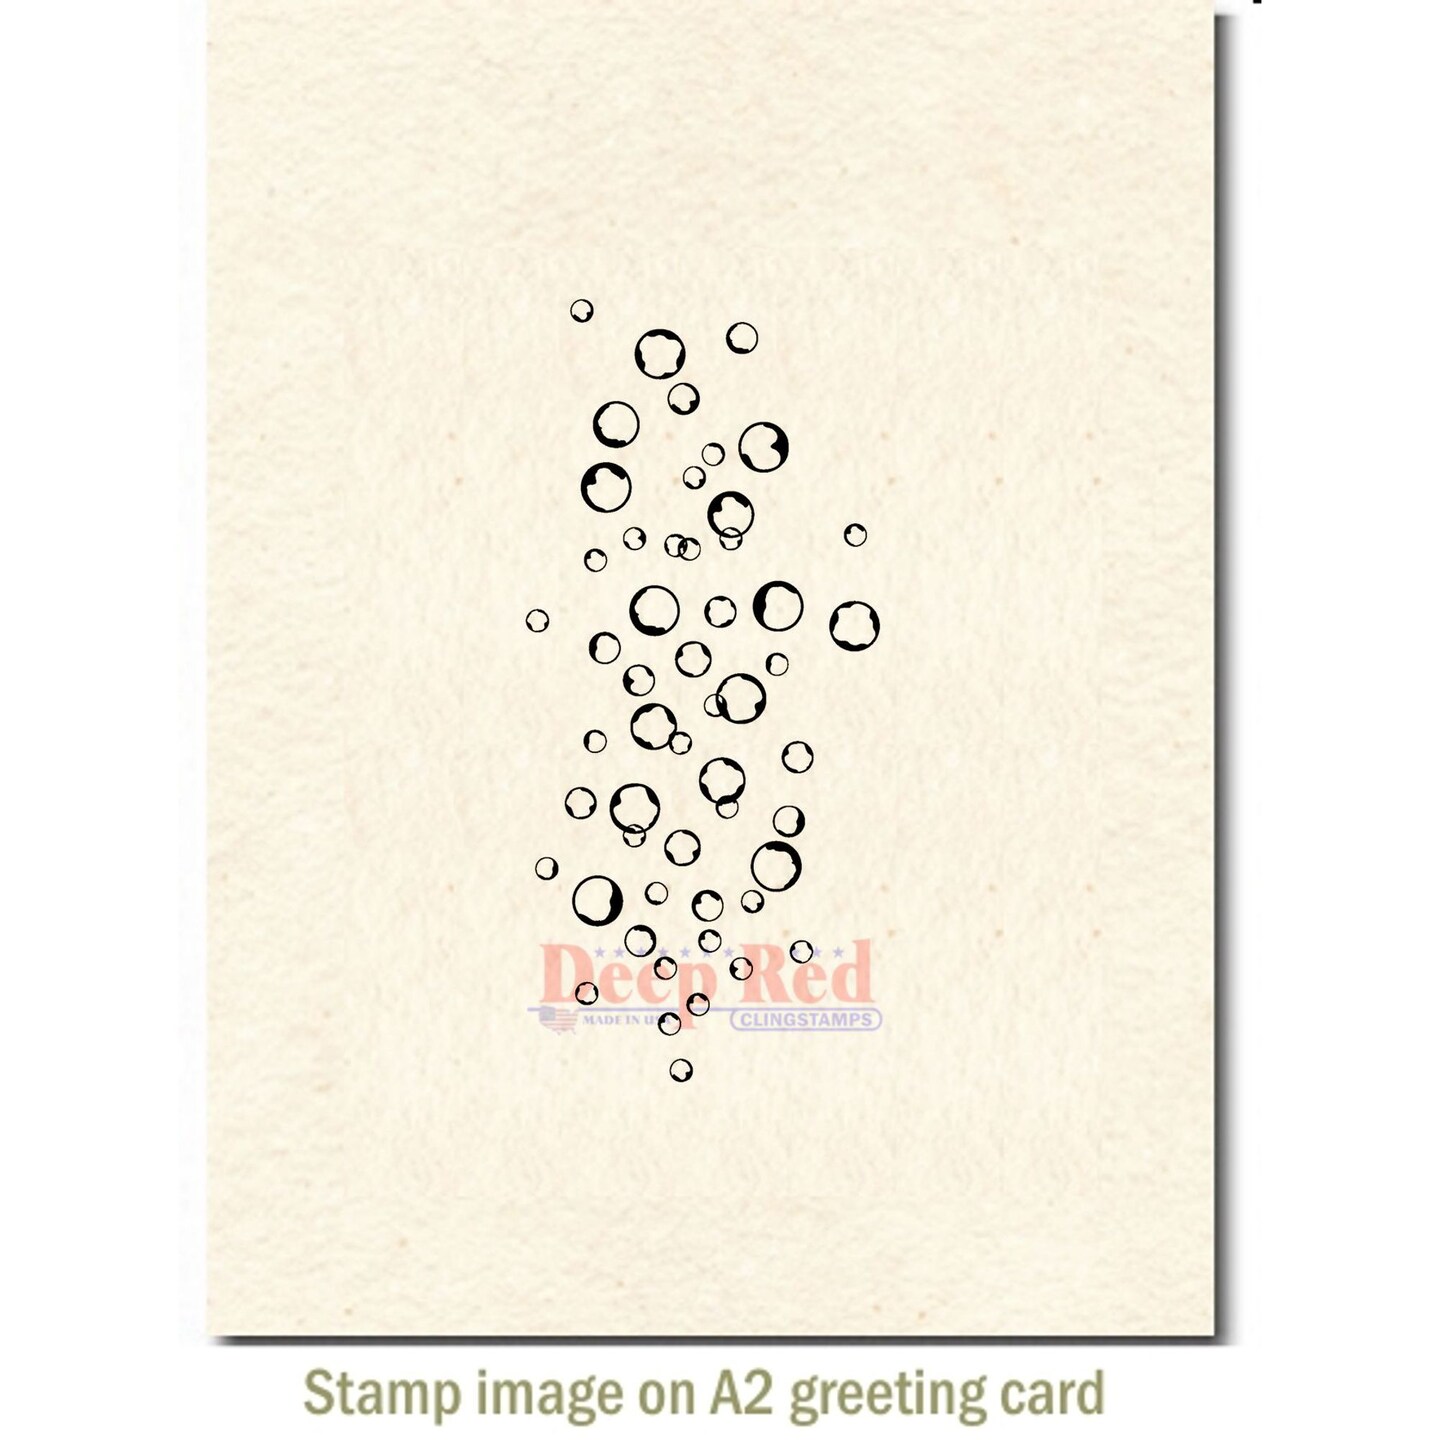 Deep Red Stamps Fizzy Bubbles Rubber Cling Stamp 1.6 x 3.3 inches